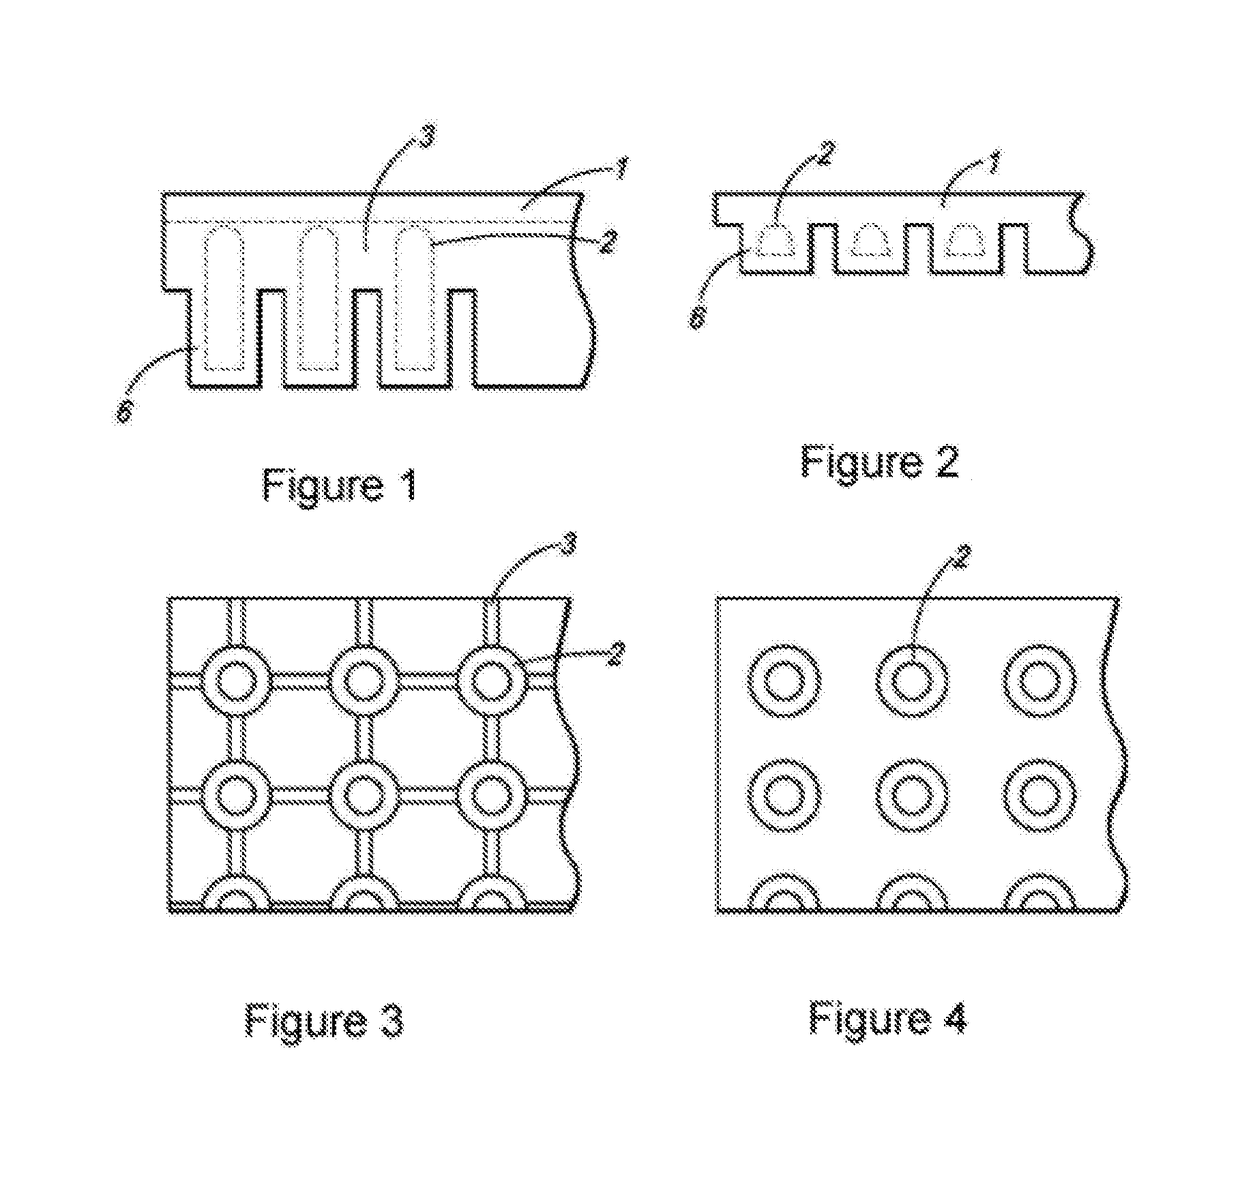 Impact absorbing matting and padding system with elastomeric sub-surface structure